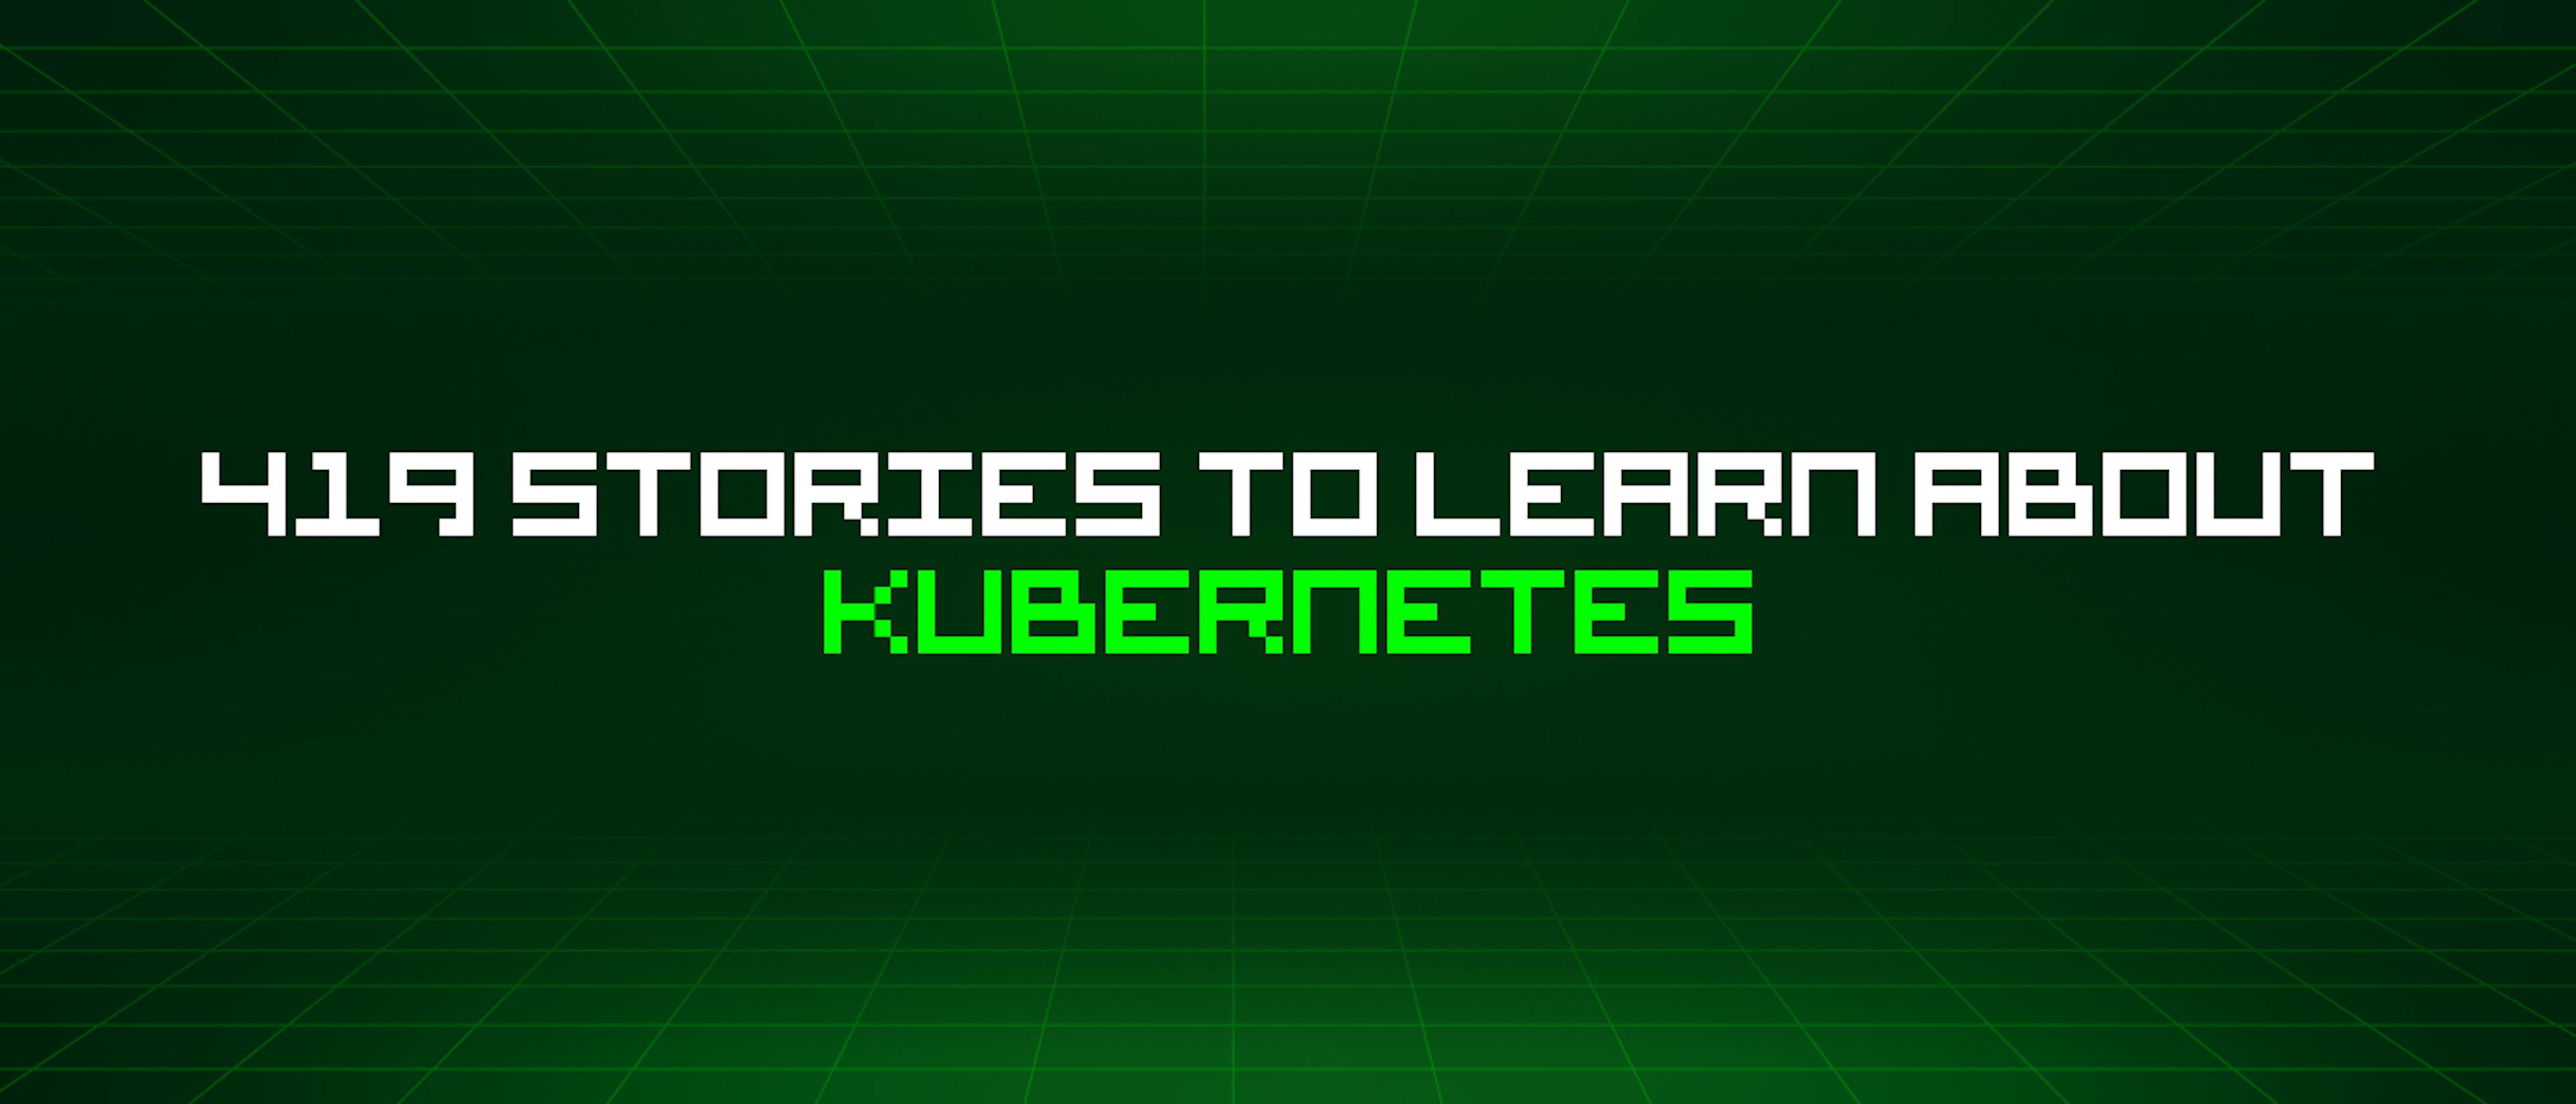 /419-stories-to-learn-about-kubernetes feature image